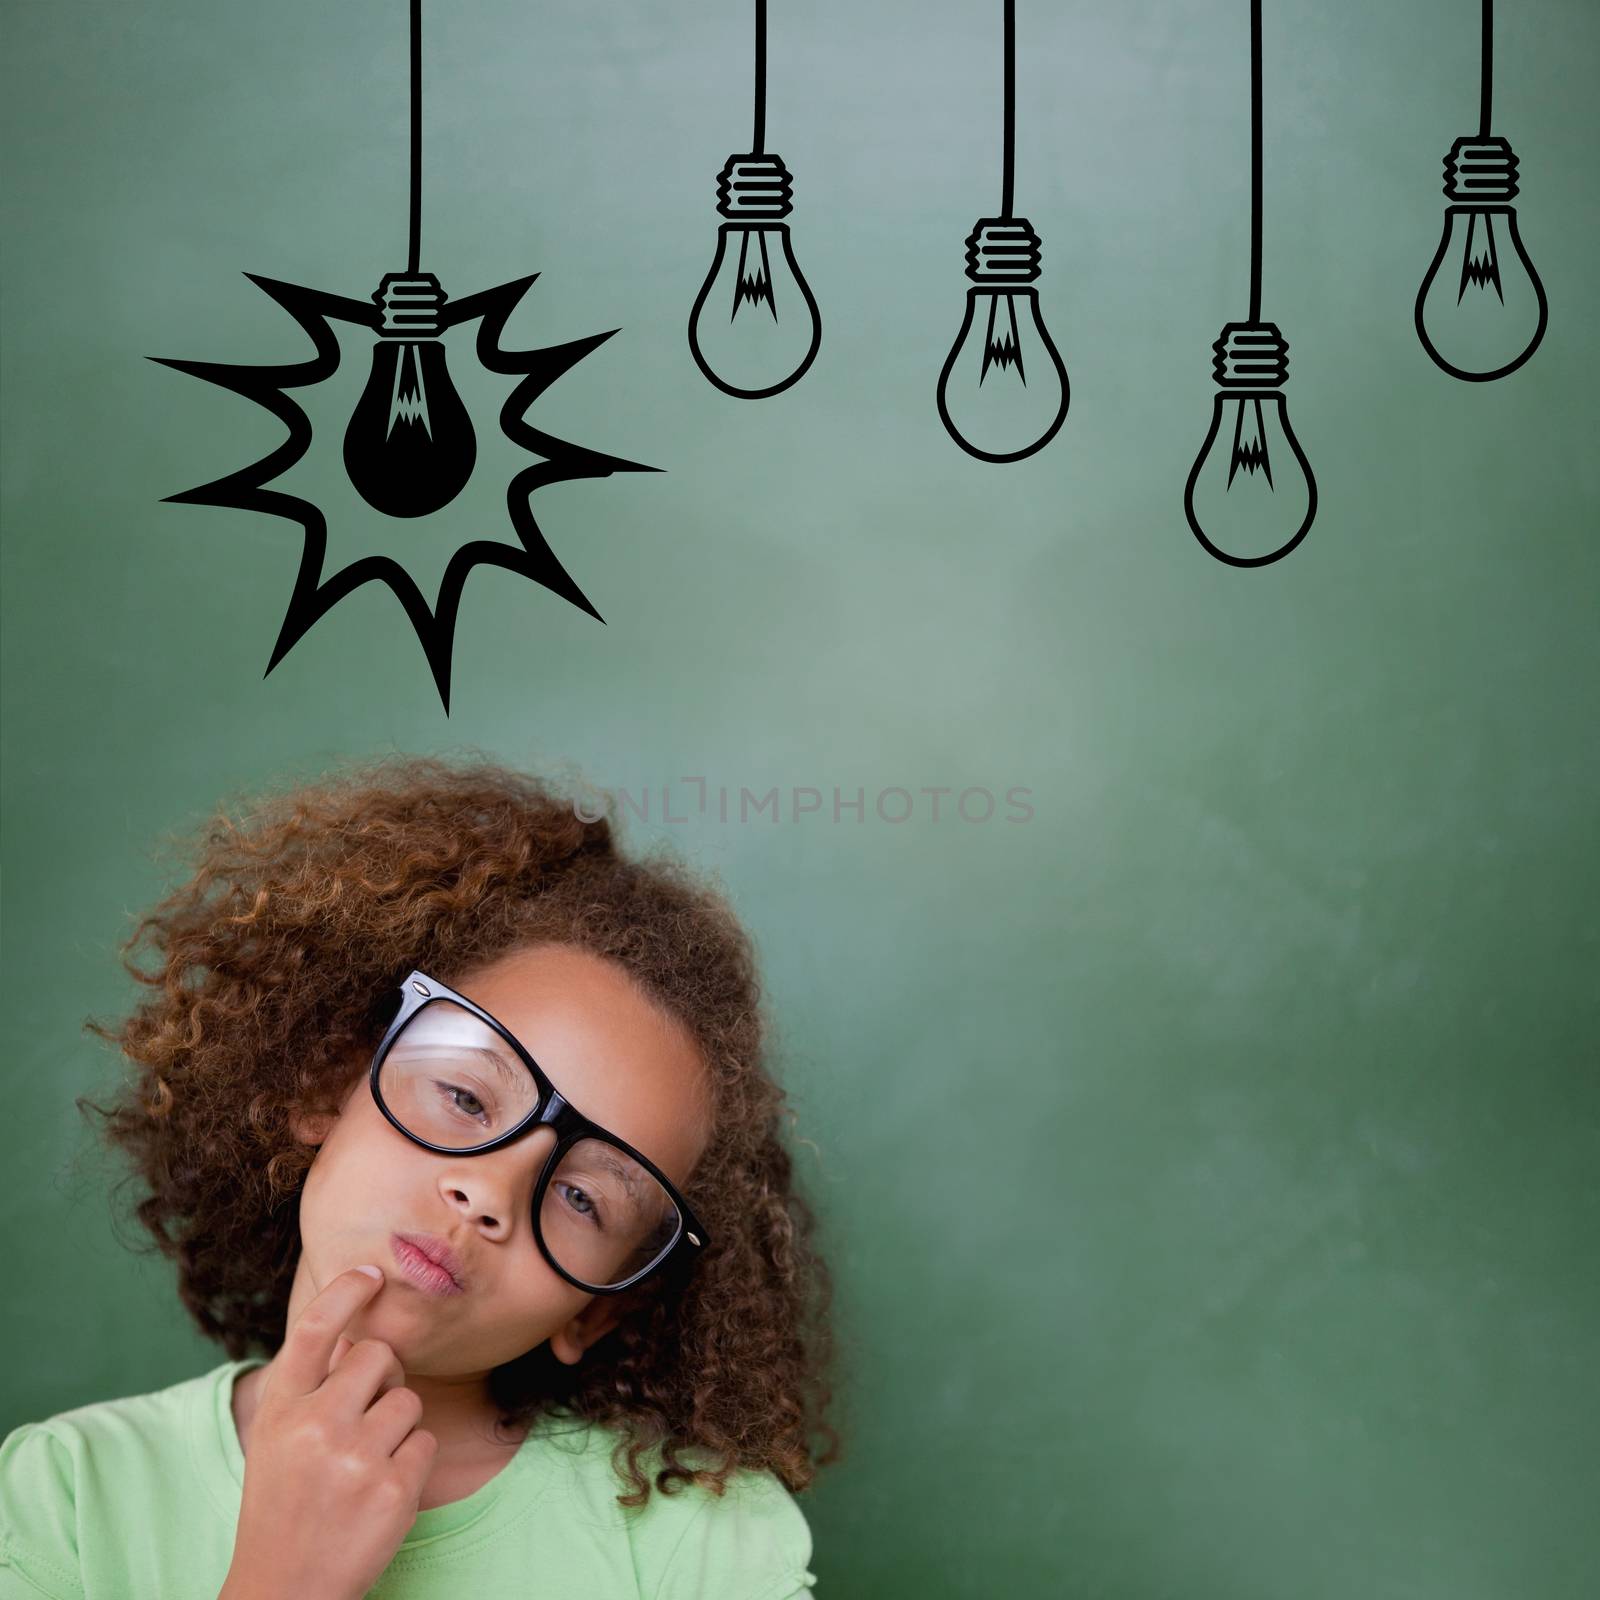 Cute pupil thinking against idea and innovation graphic